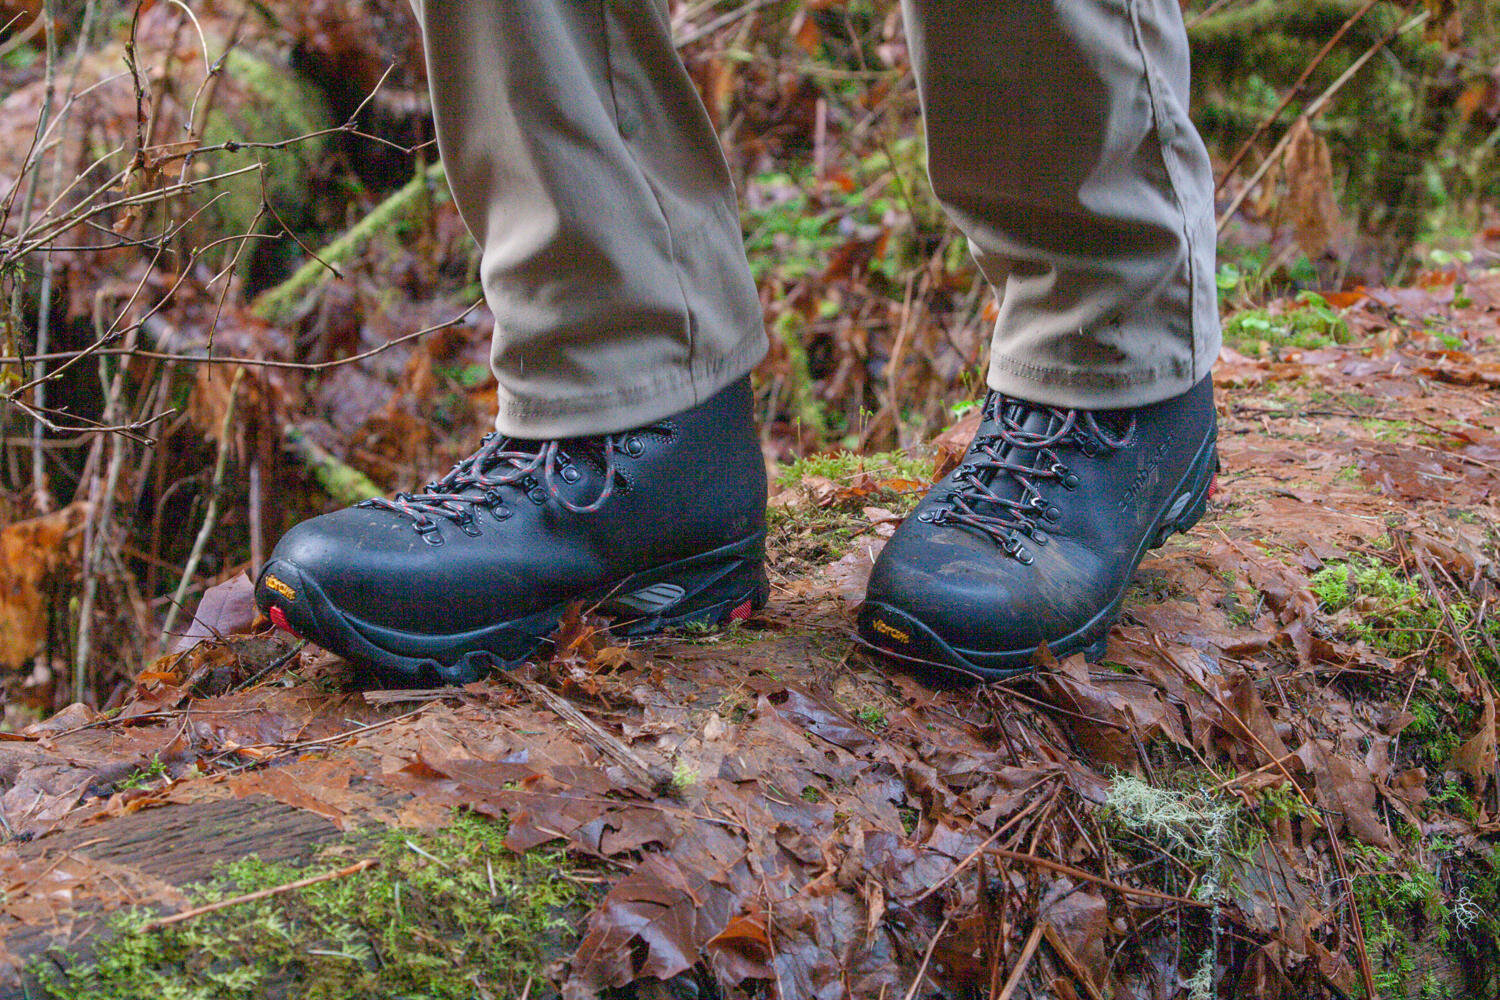 The ultra-durable Zamberlan Vioz GTX boots are made with some of the highest quality materials around